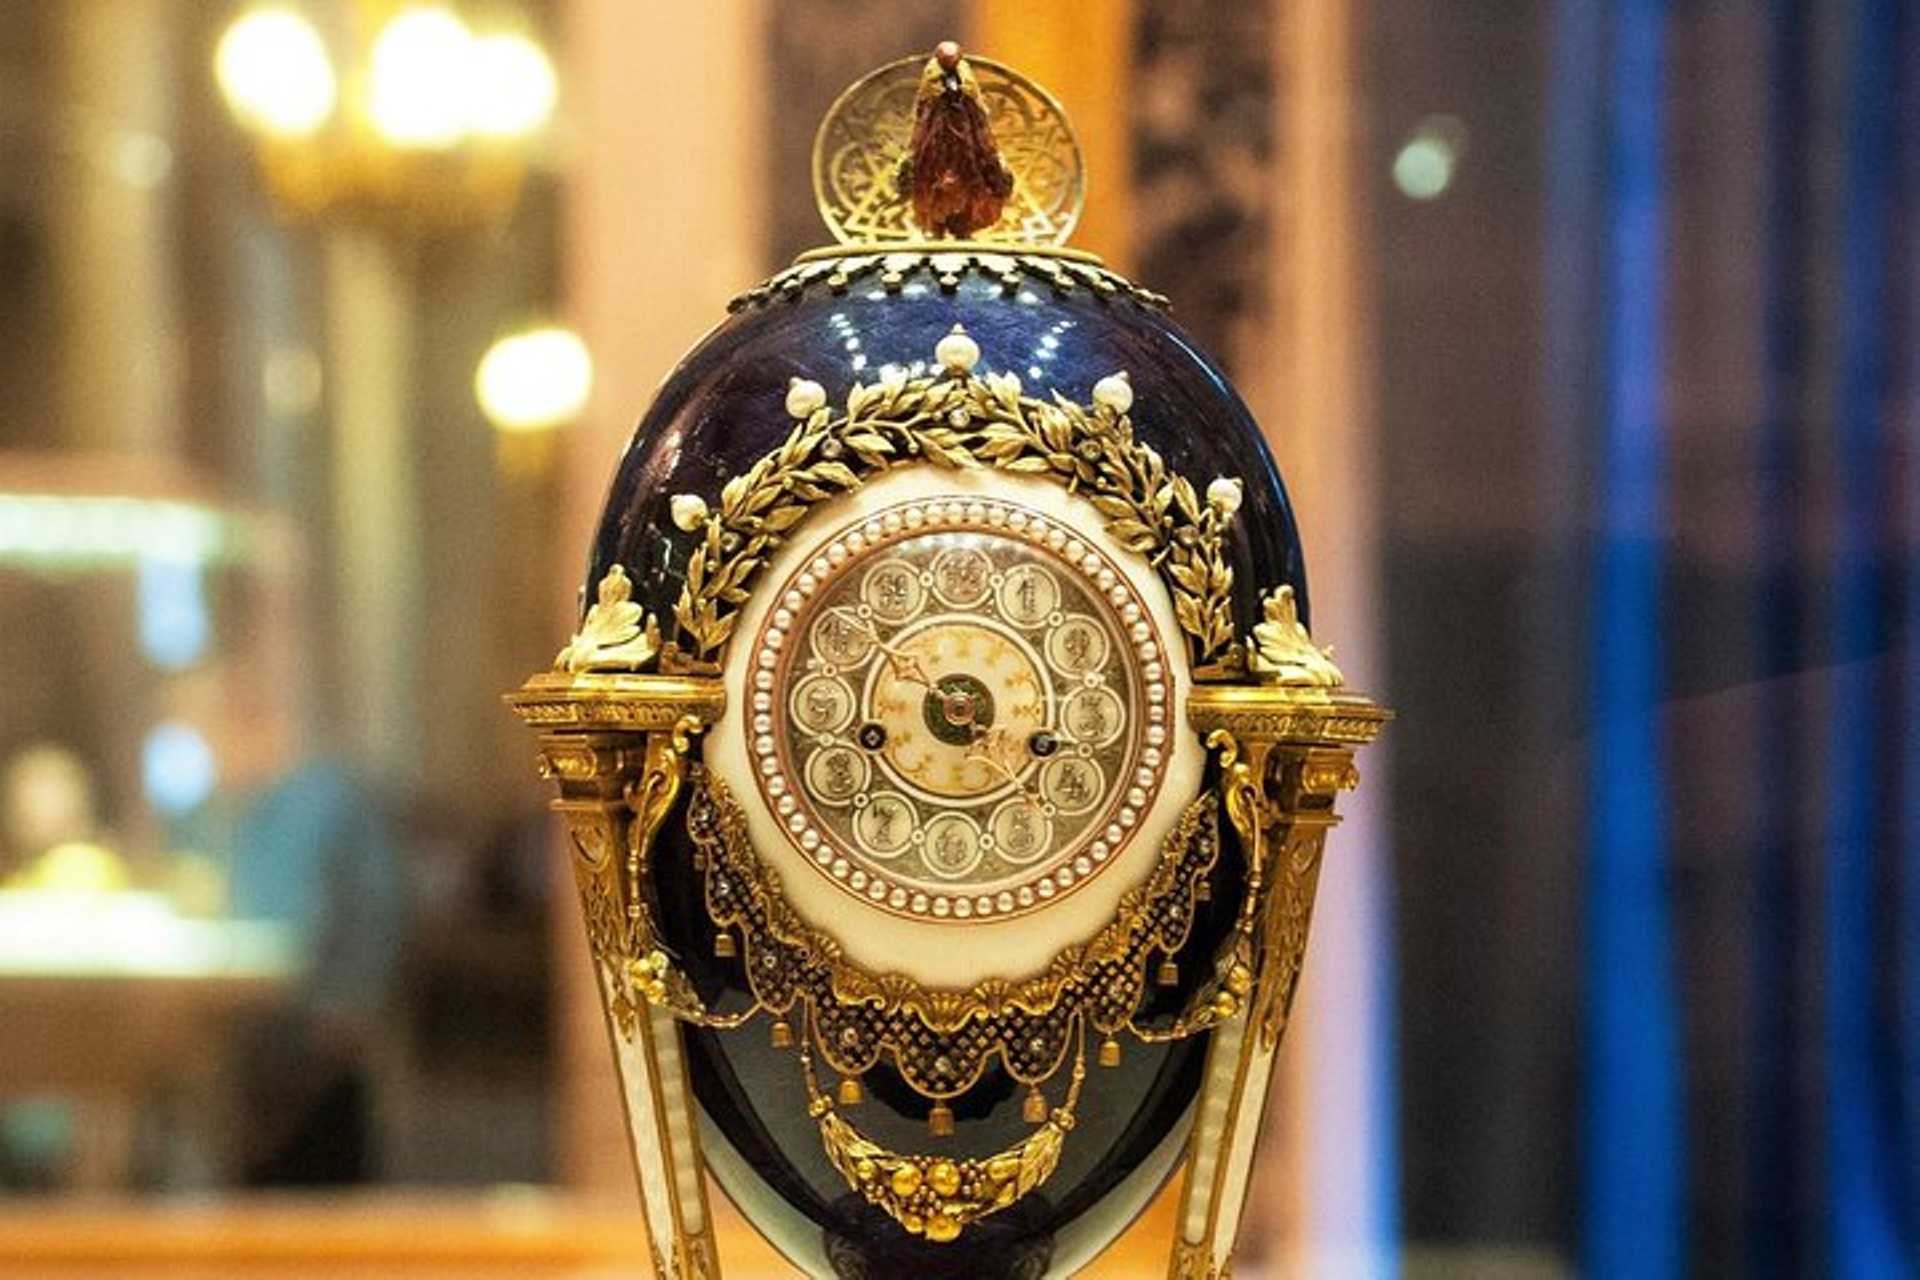 Skip The Line: Legendary Faberge Eggs on Private Tour of Faberge Museum